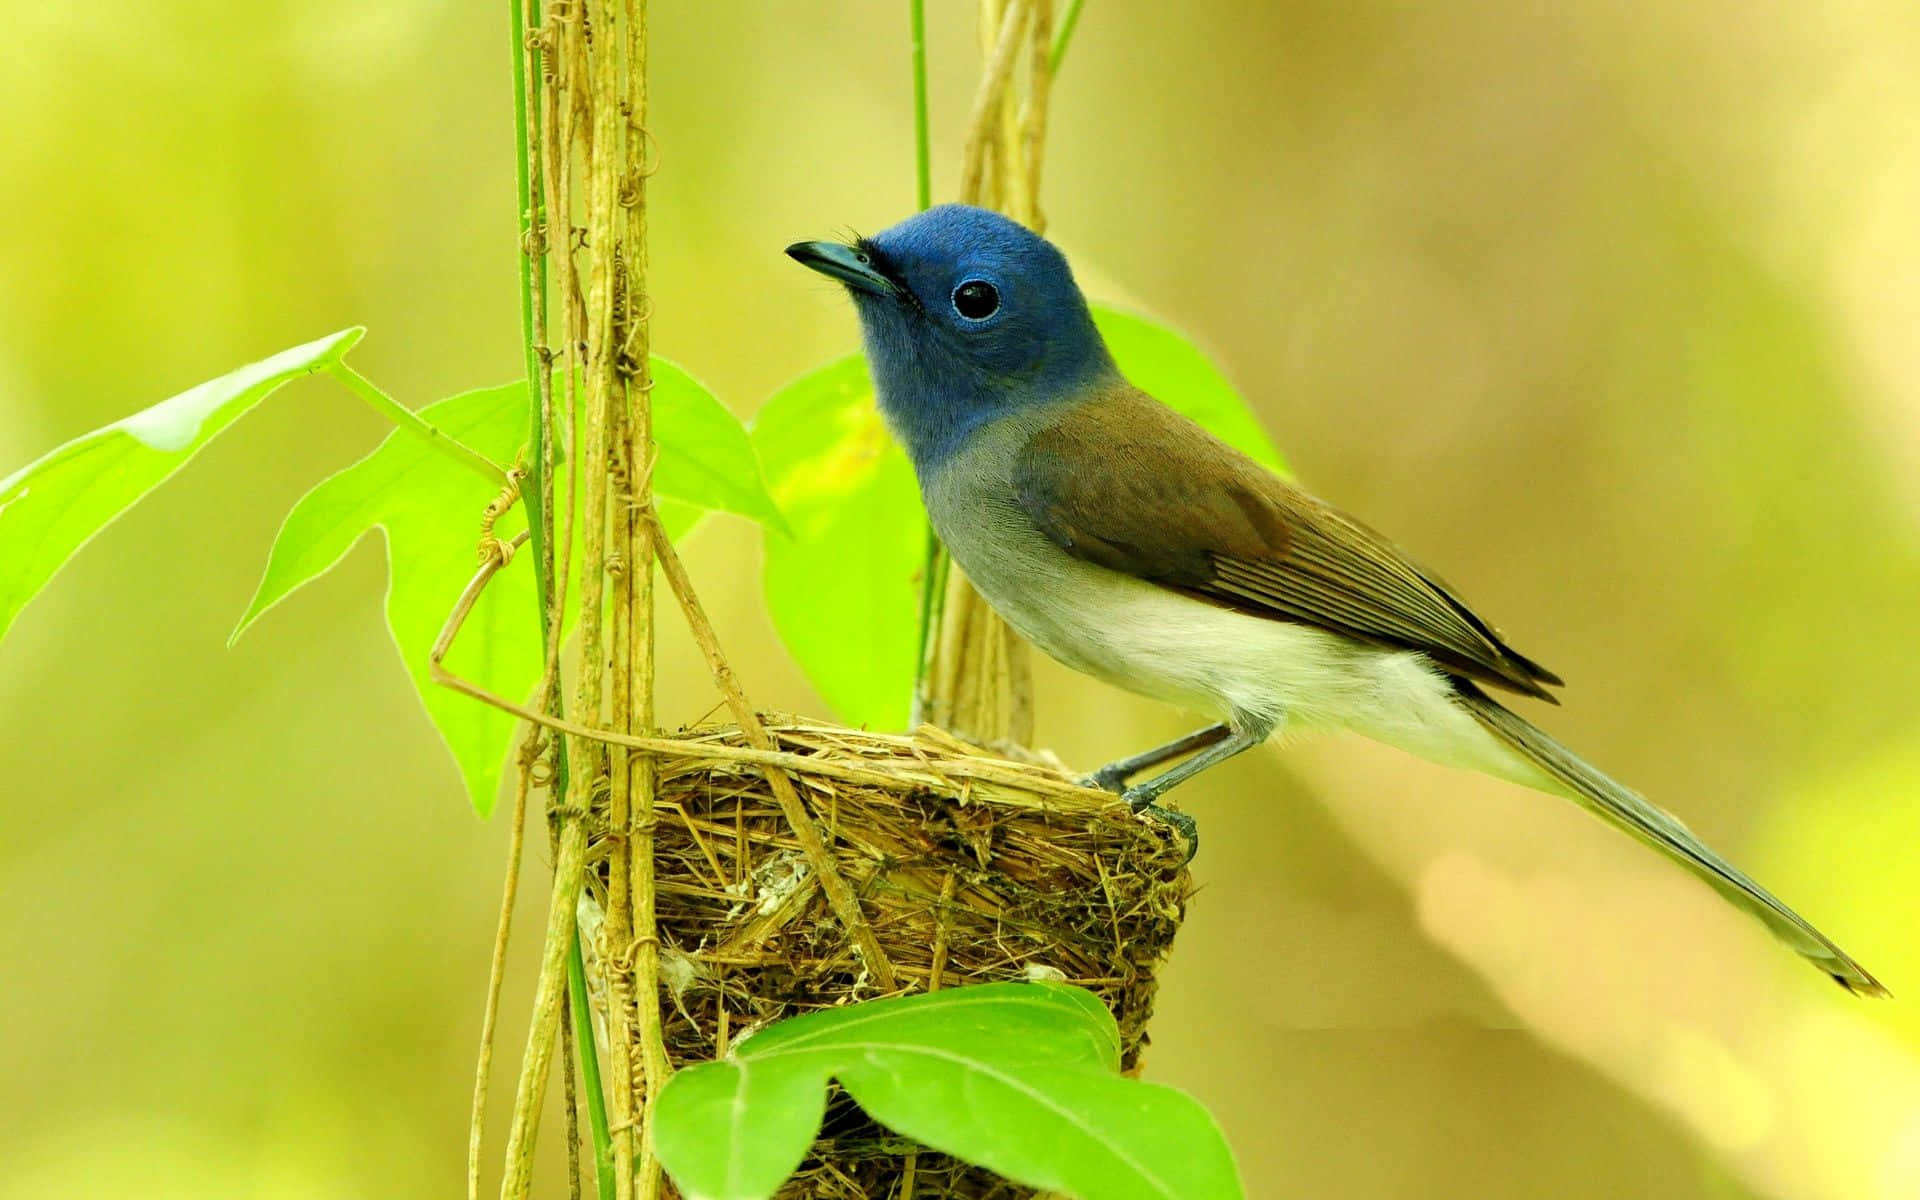 A Blue Bird Perched On A Nest In The Forest